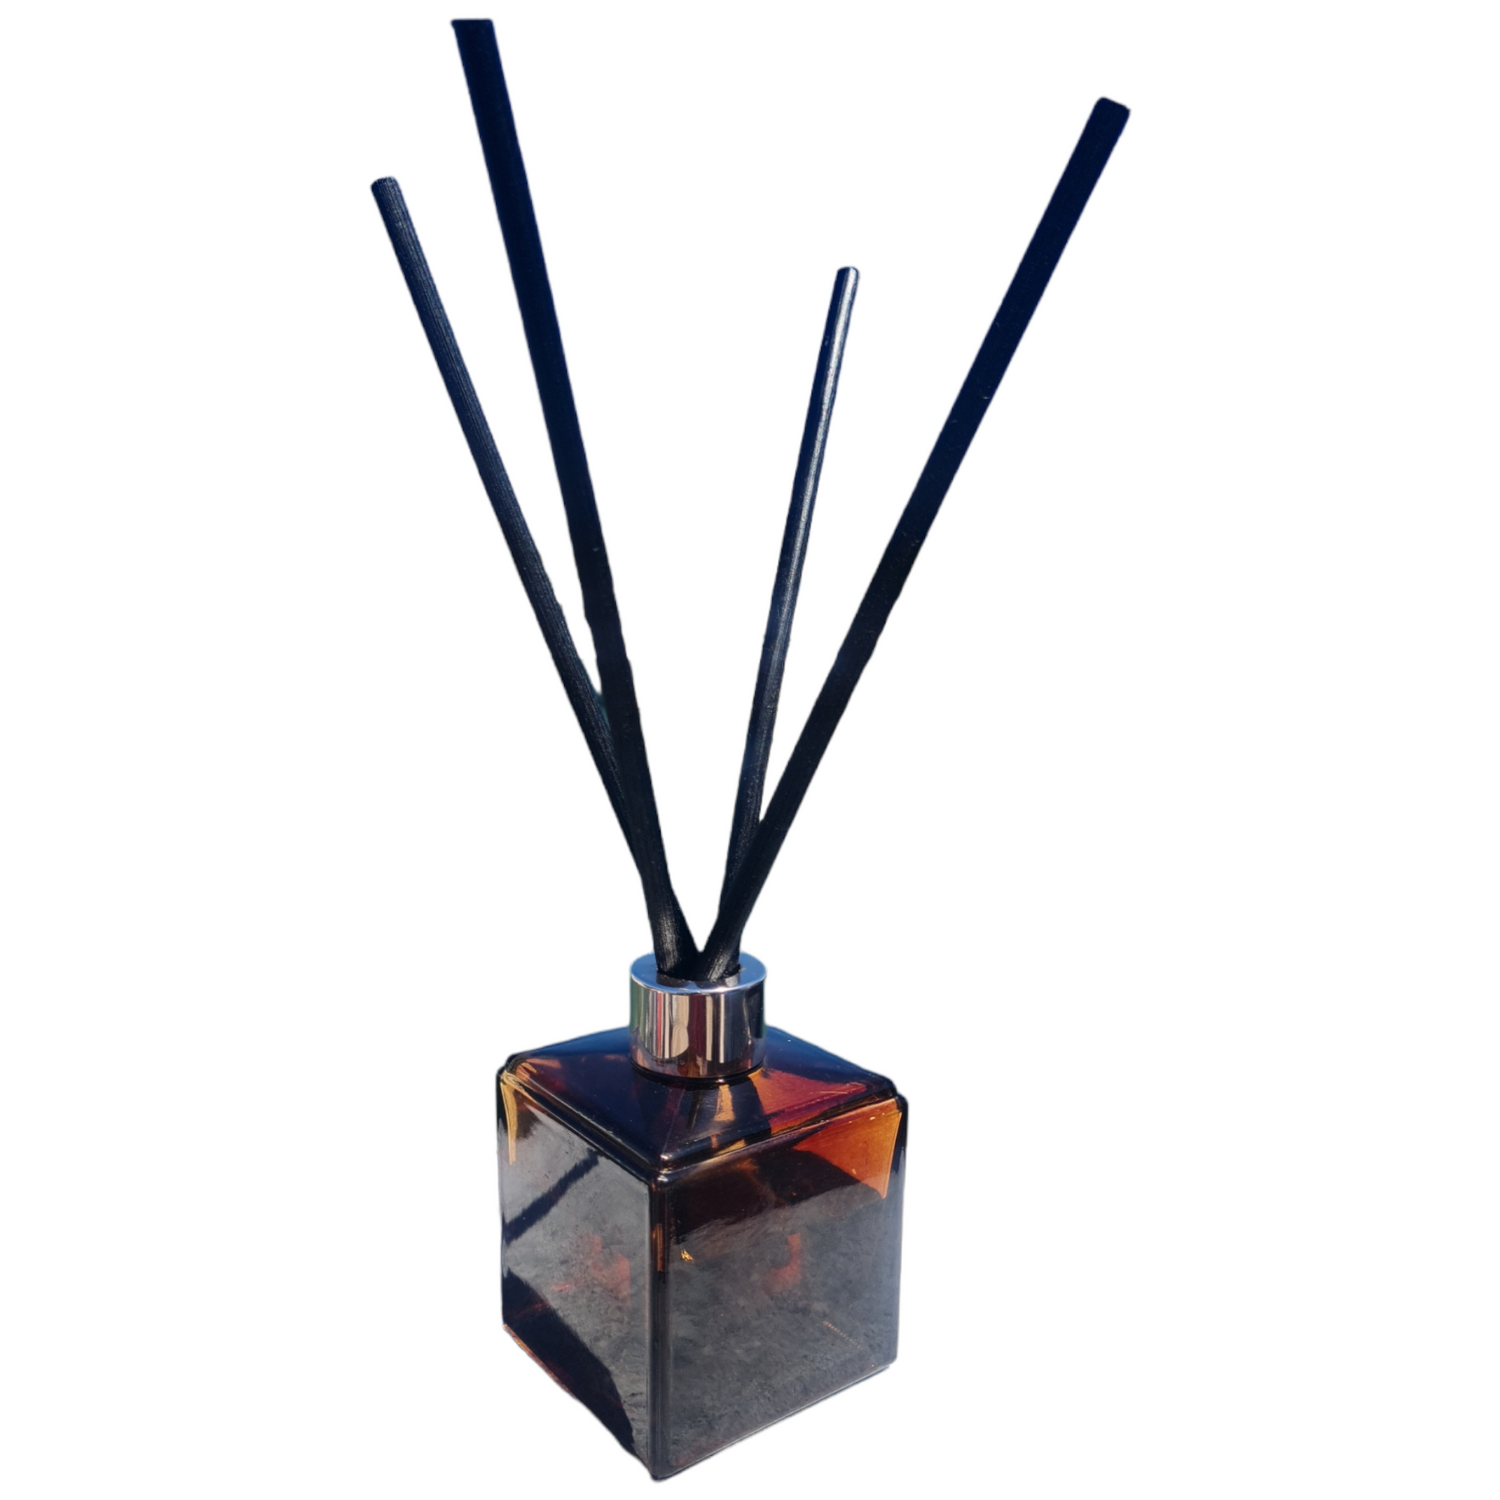 Room Fragrance Diffusers